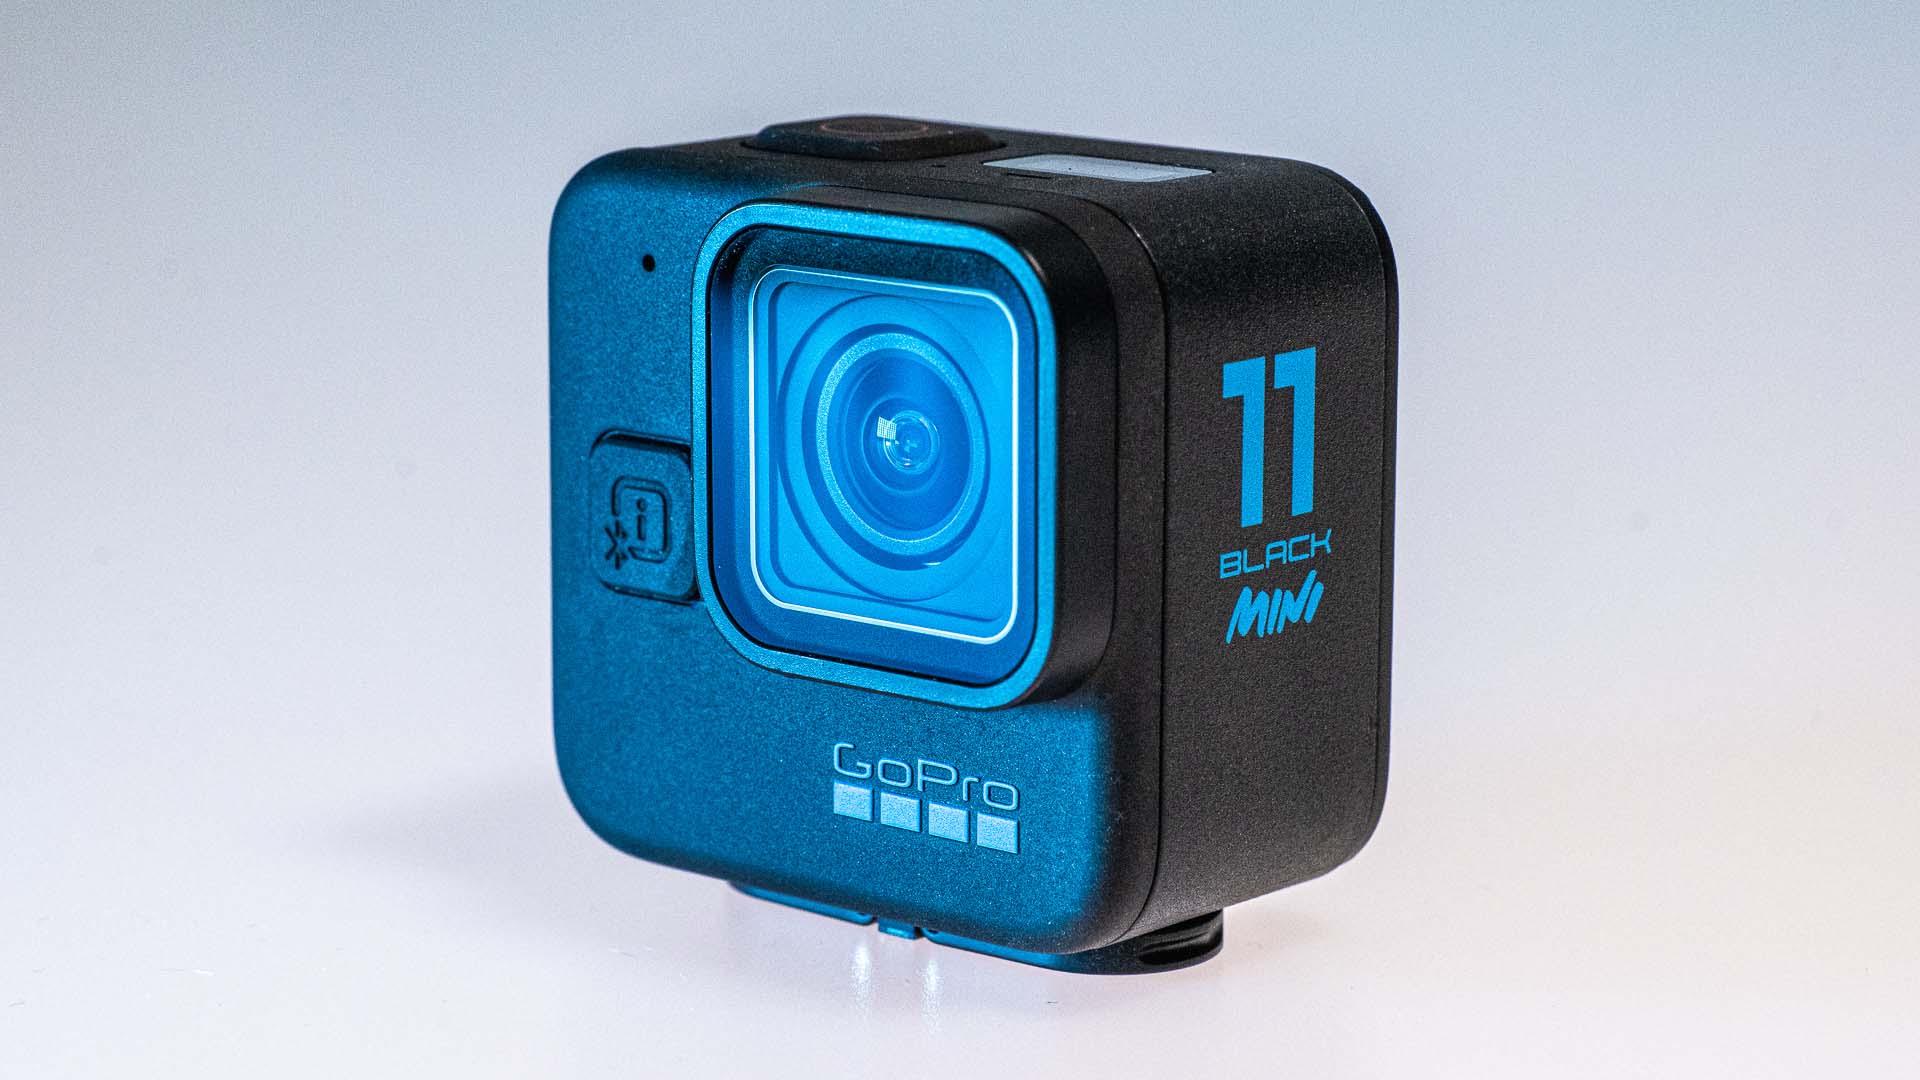 GoPro HERO Mini review: Compact and rugged